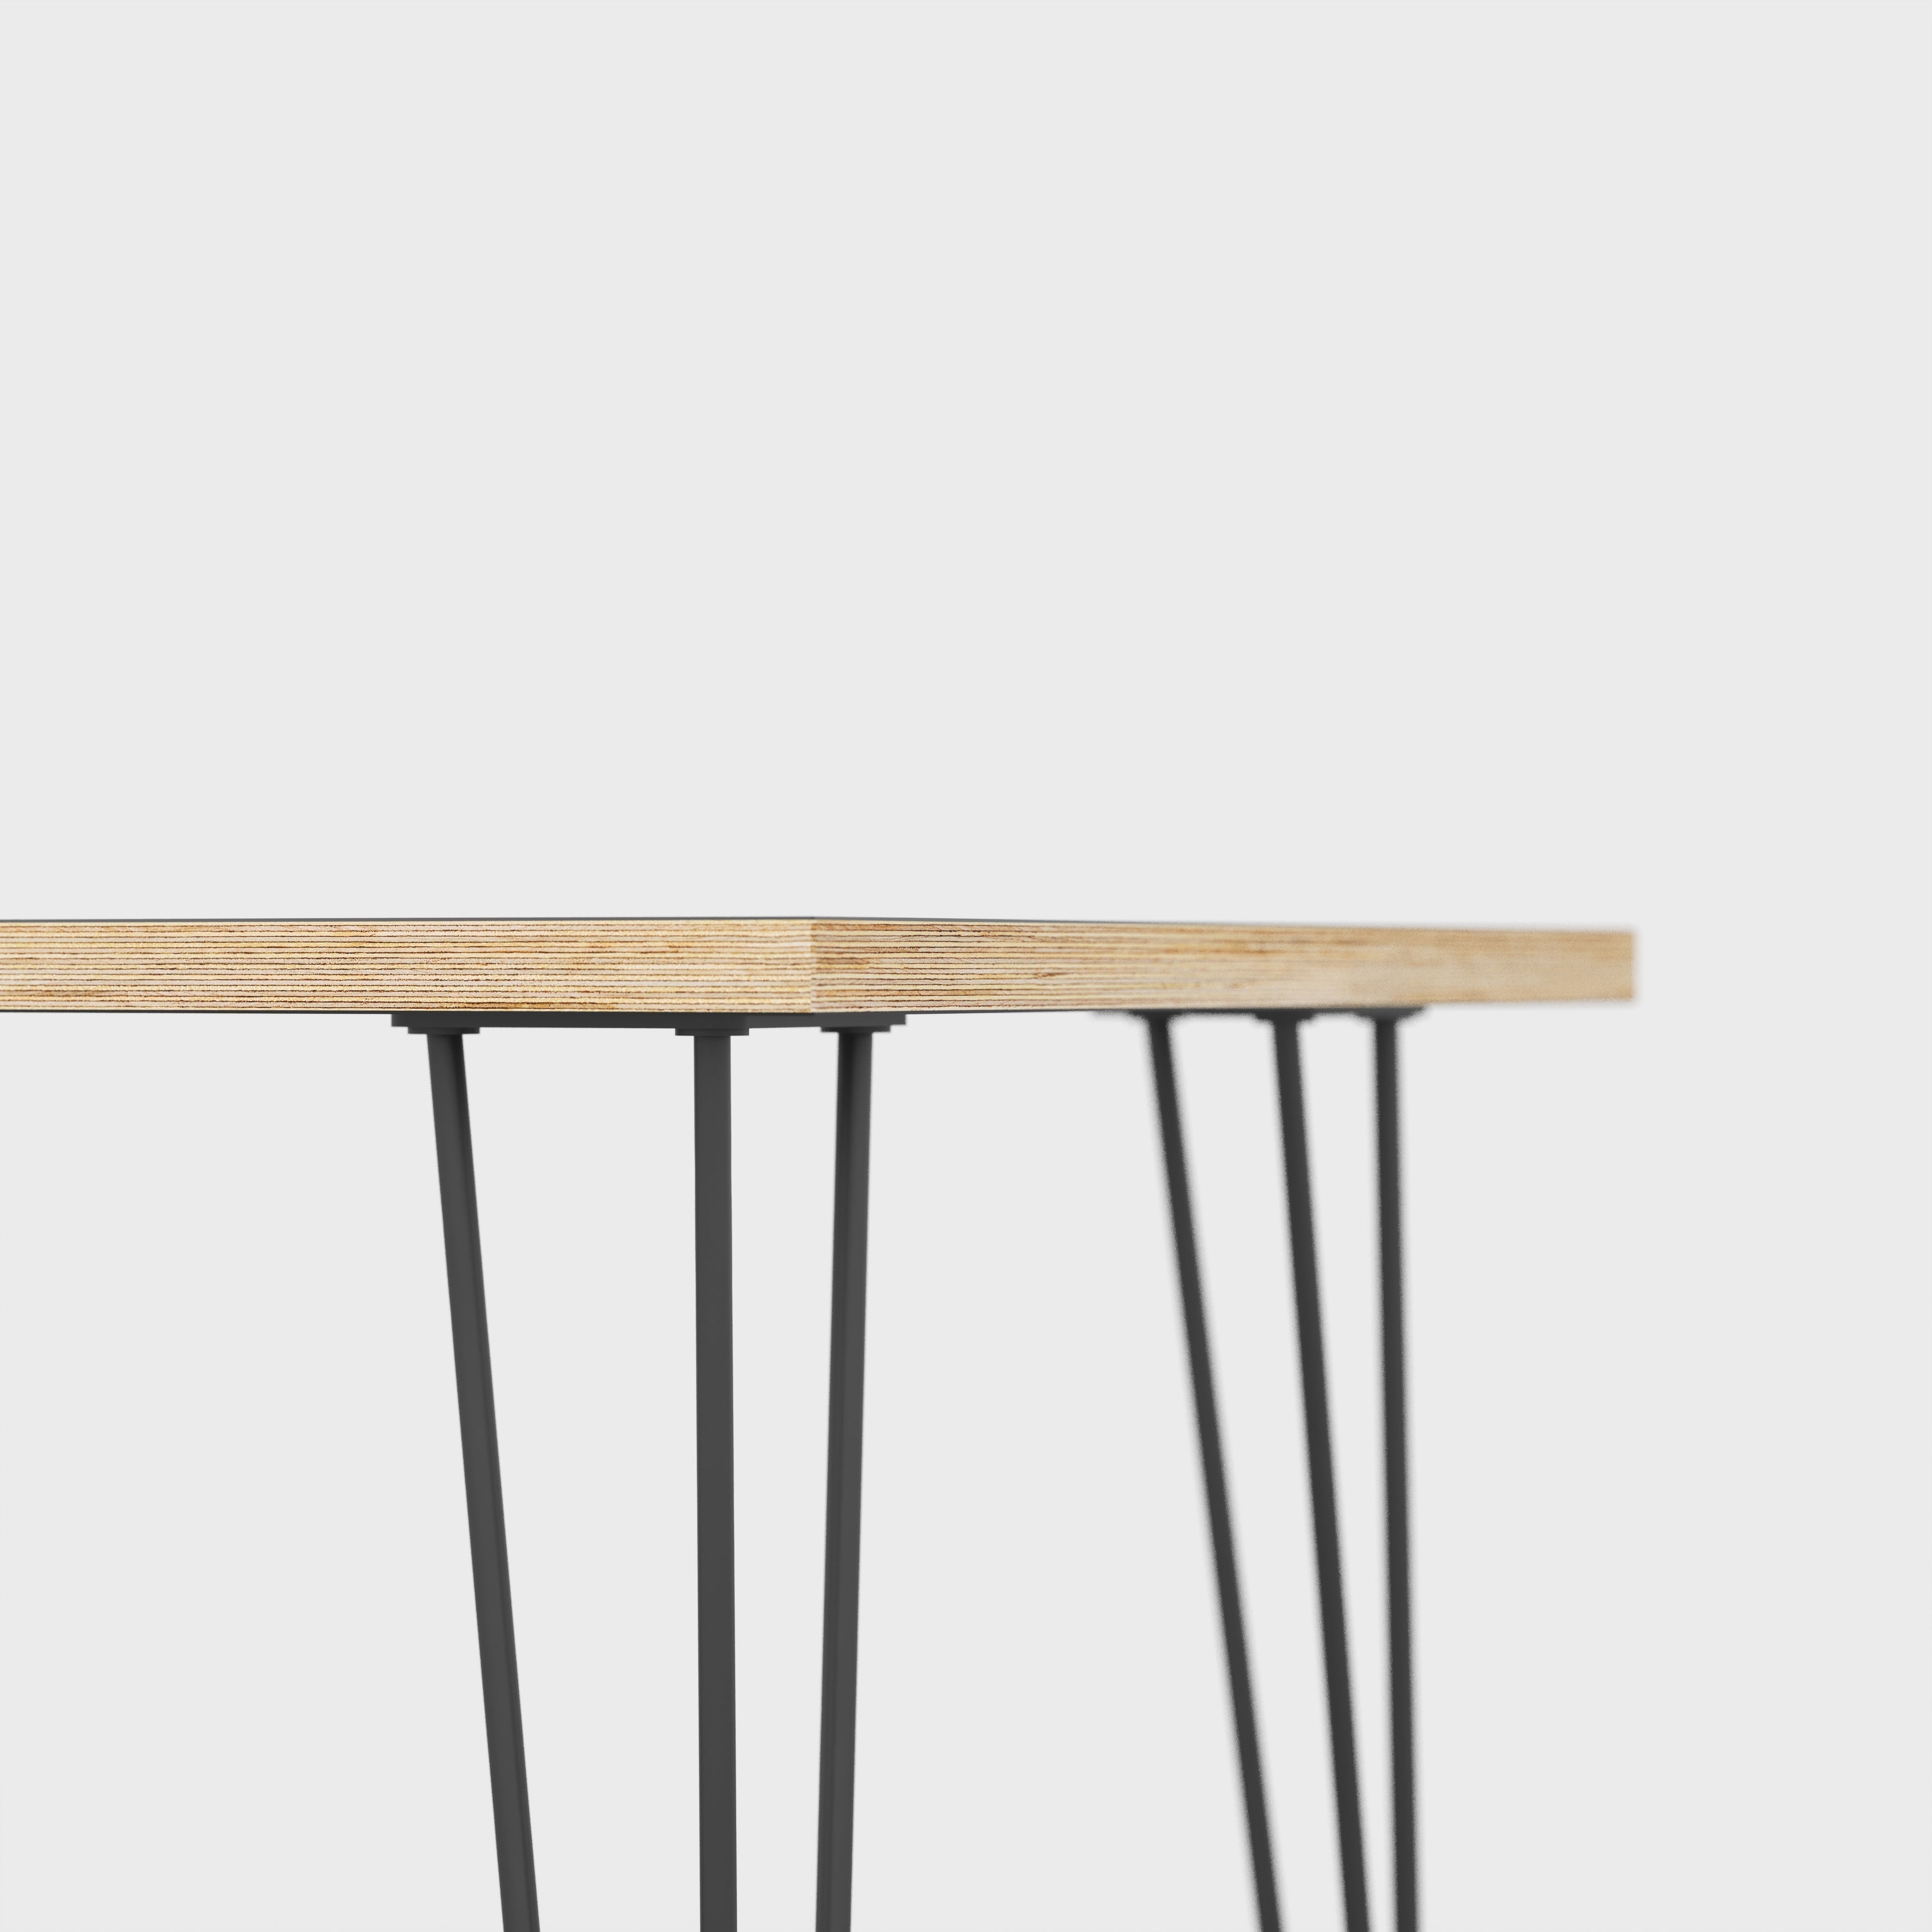 Side Table with Black Hairpin Legs - Formica Tornado Grey - 500(w) x 500(d) x 425(h)